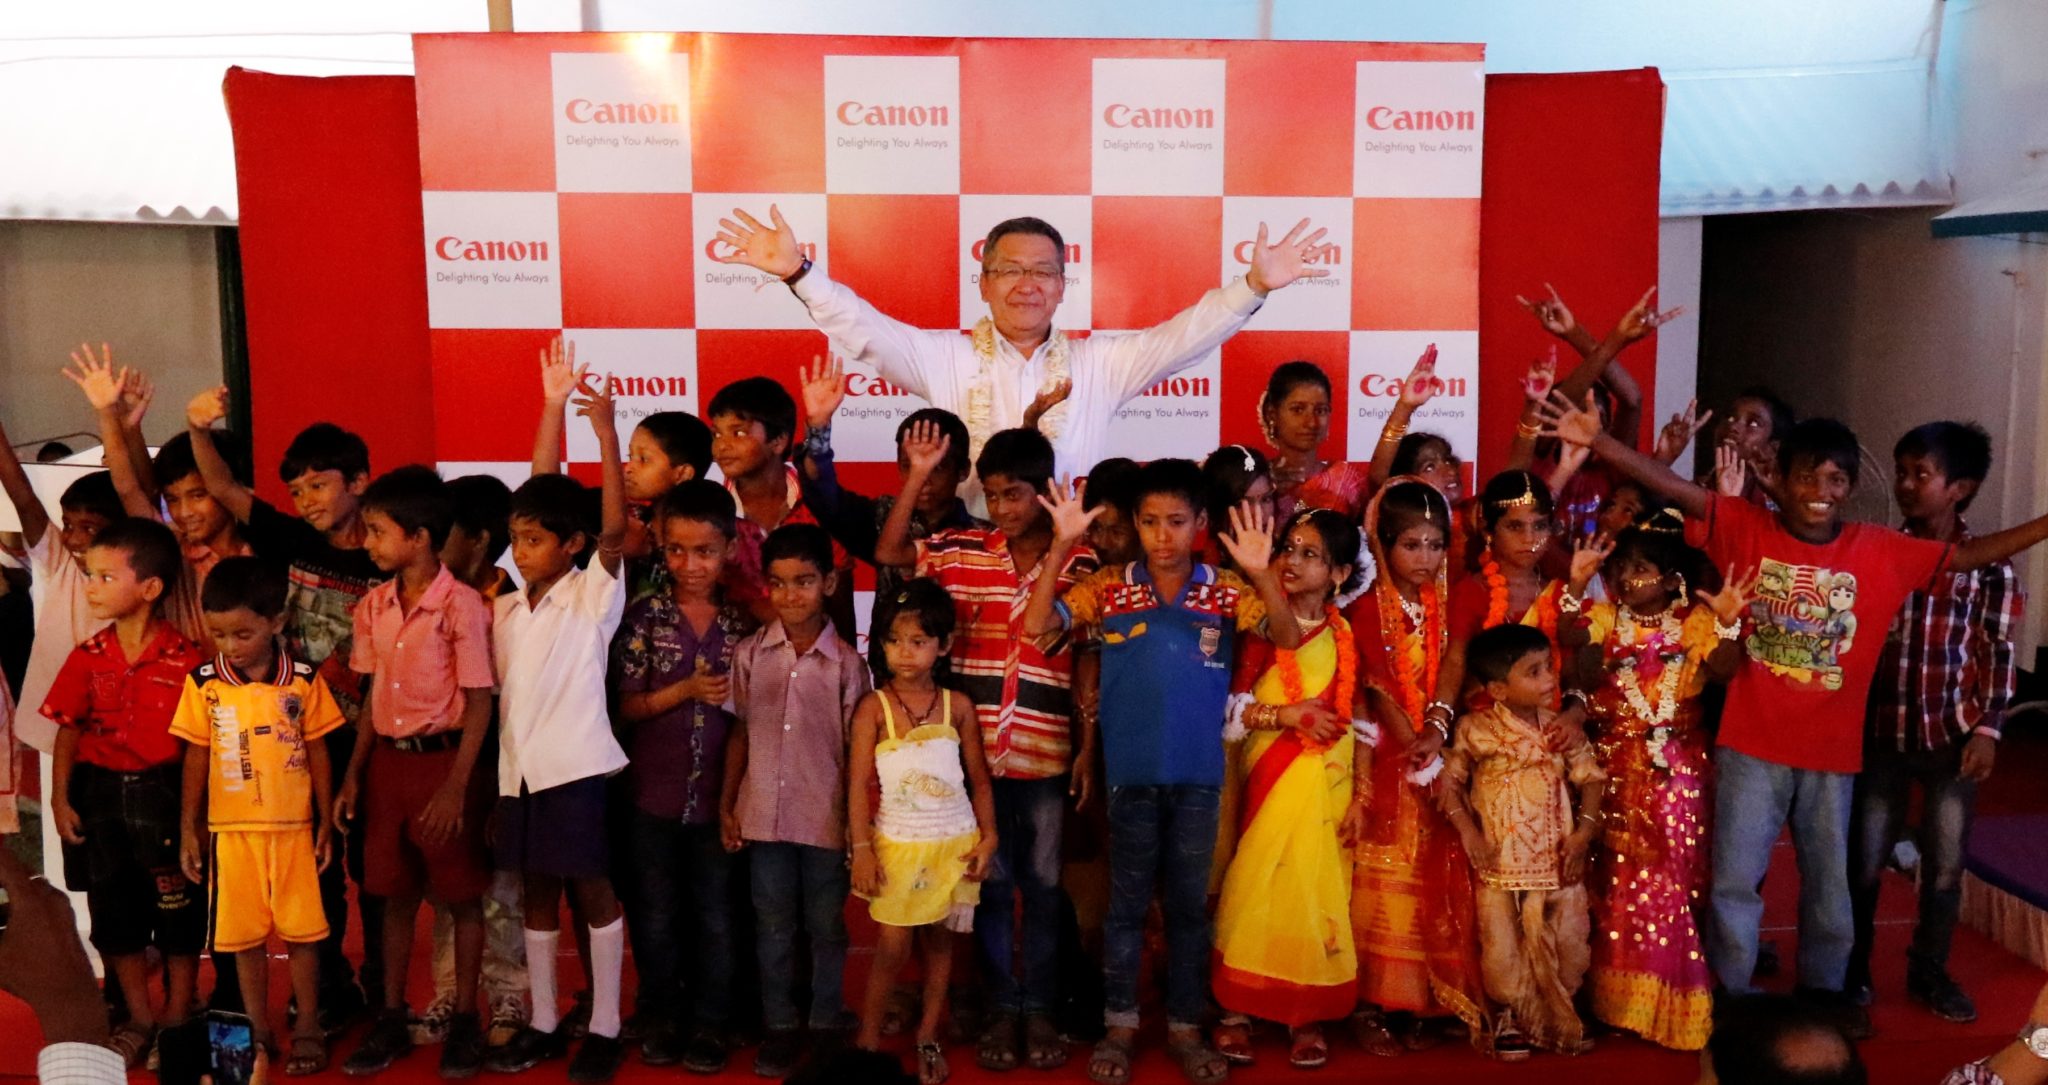 Mr. Kazutada Kobayashi  President & CEO  Canon India brings smiles to young faces at the first anniversary celebratio_